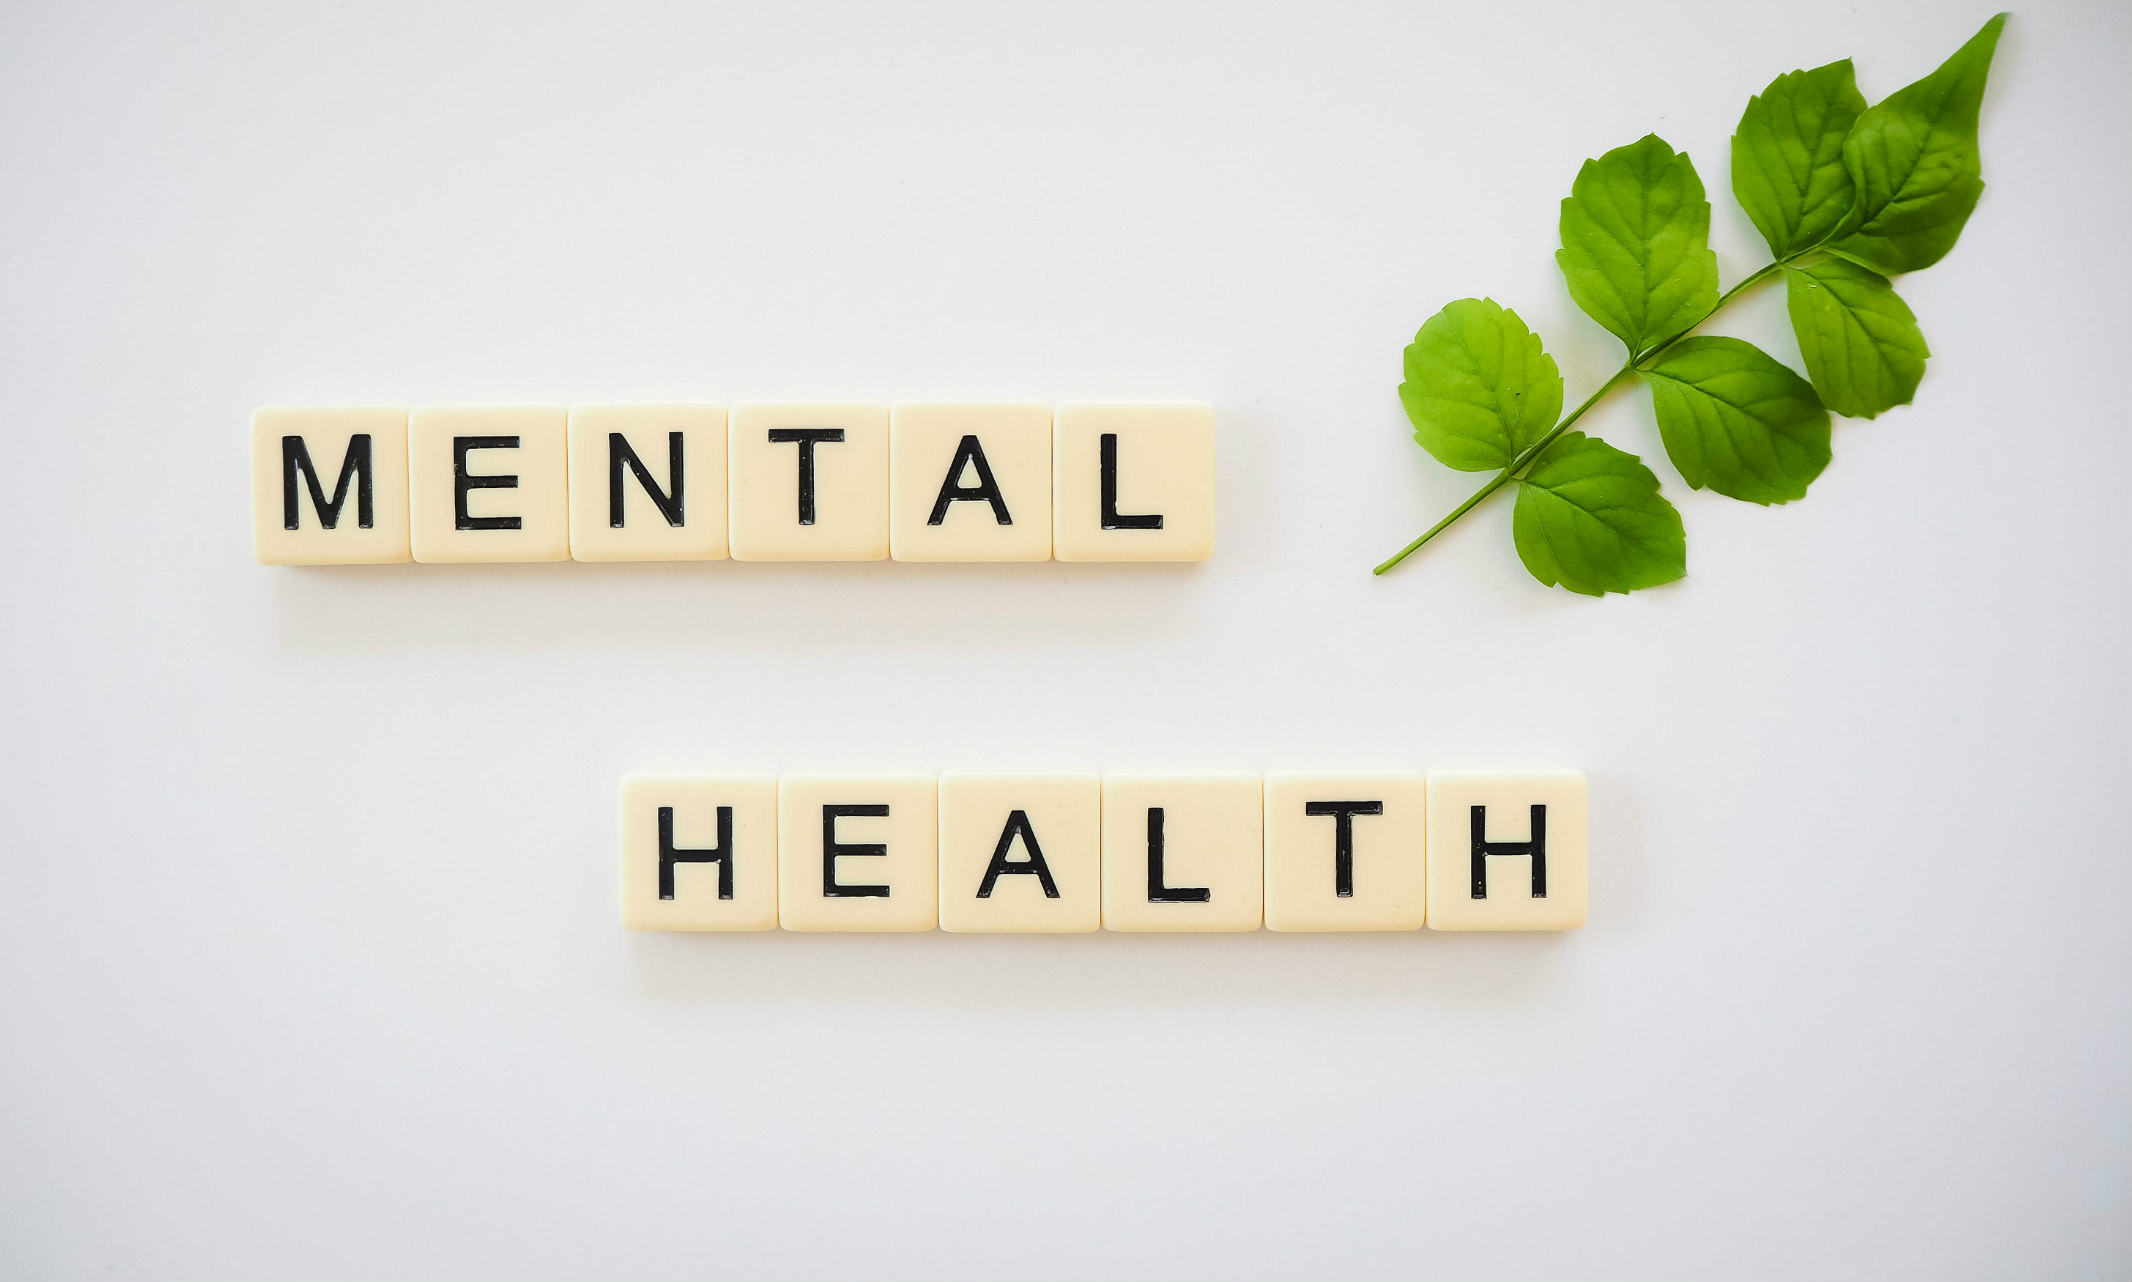 Scrabble tiles that make up the words Mental Health on a cream background, green leaf to the right of the tiles